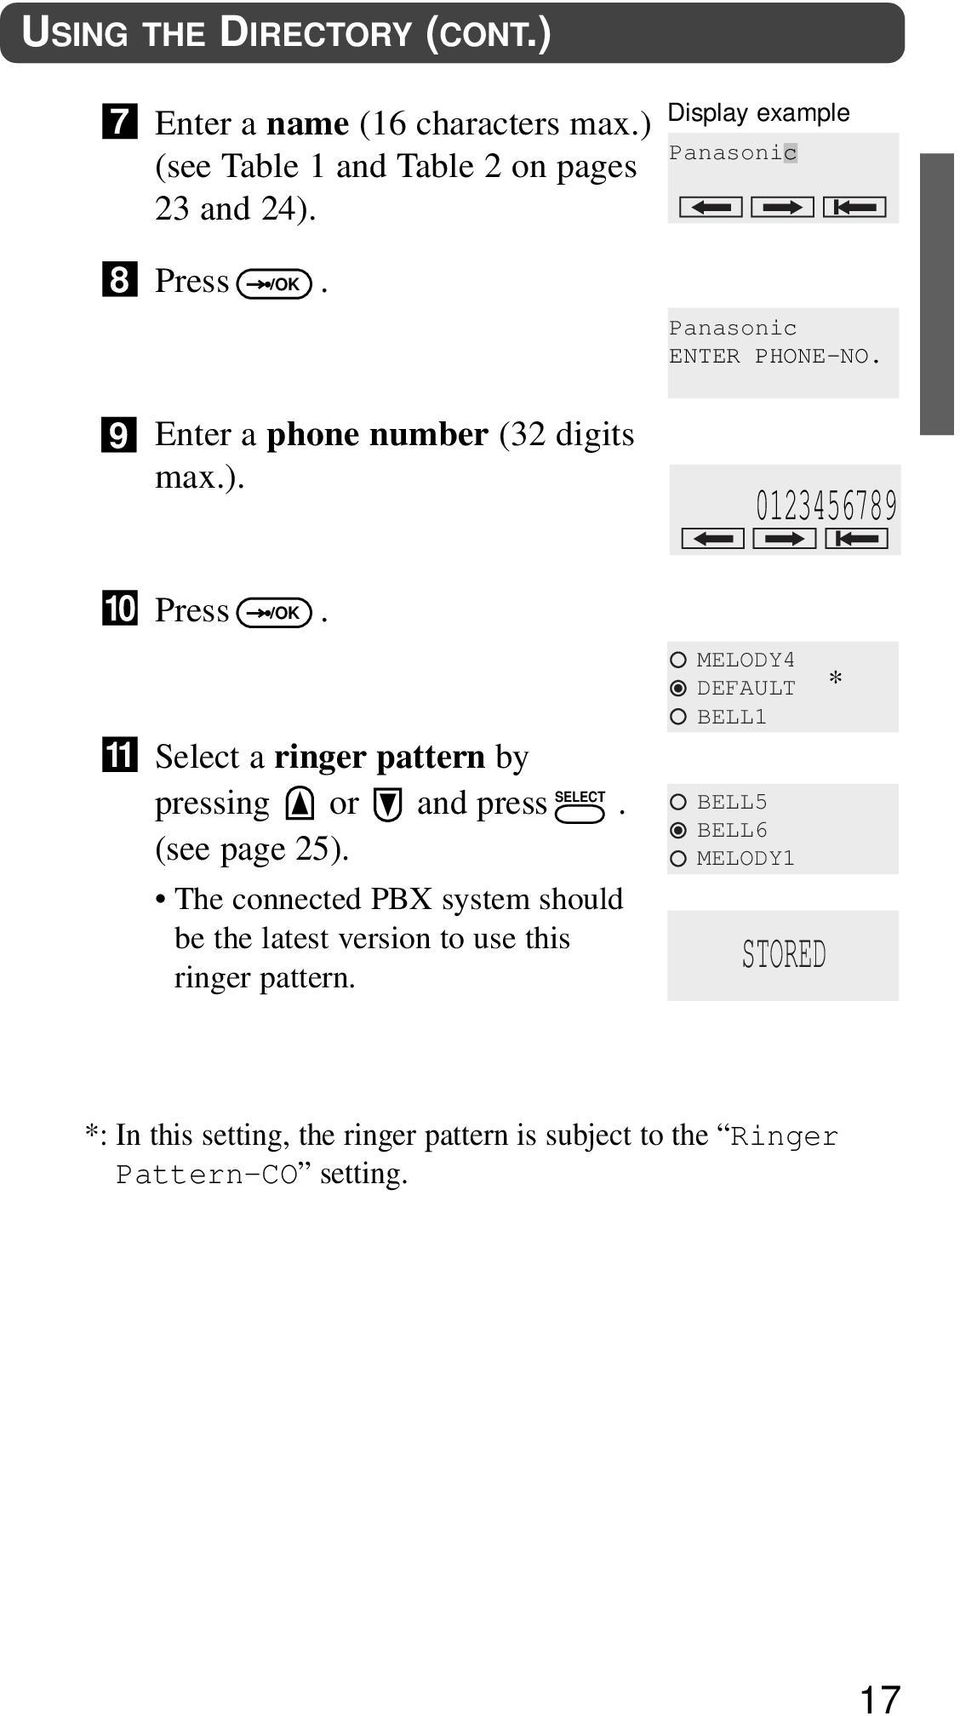 The connected PBX system should be the latest version to use this ringer pattern.